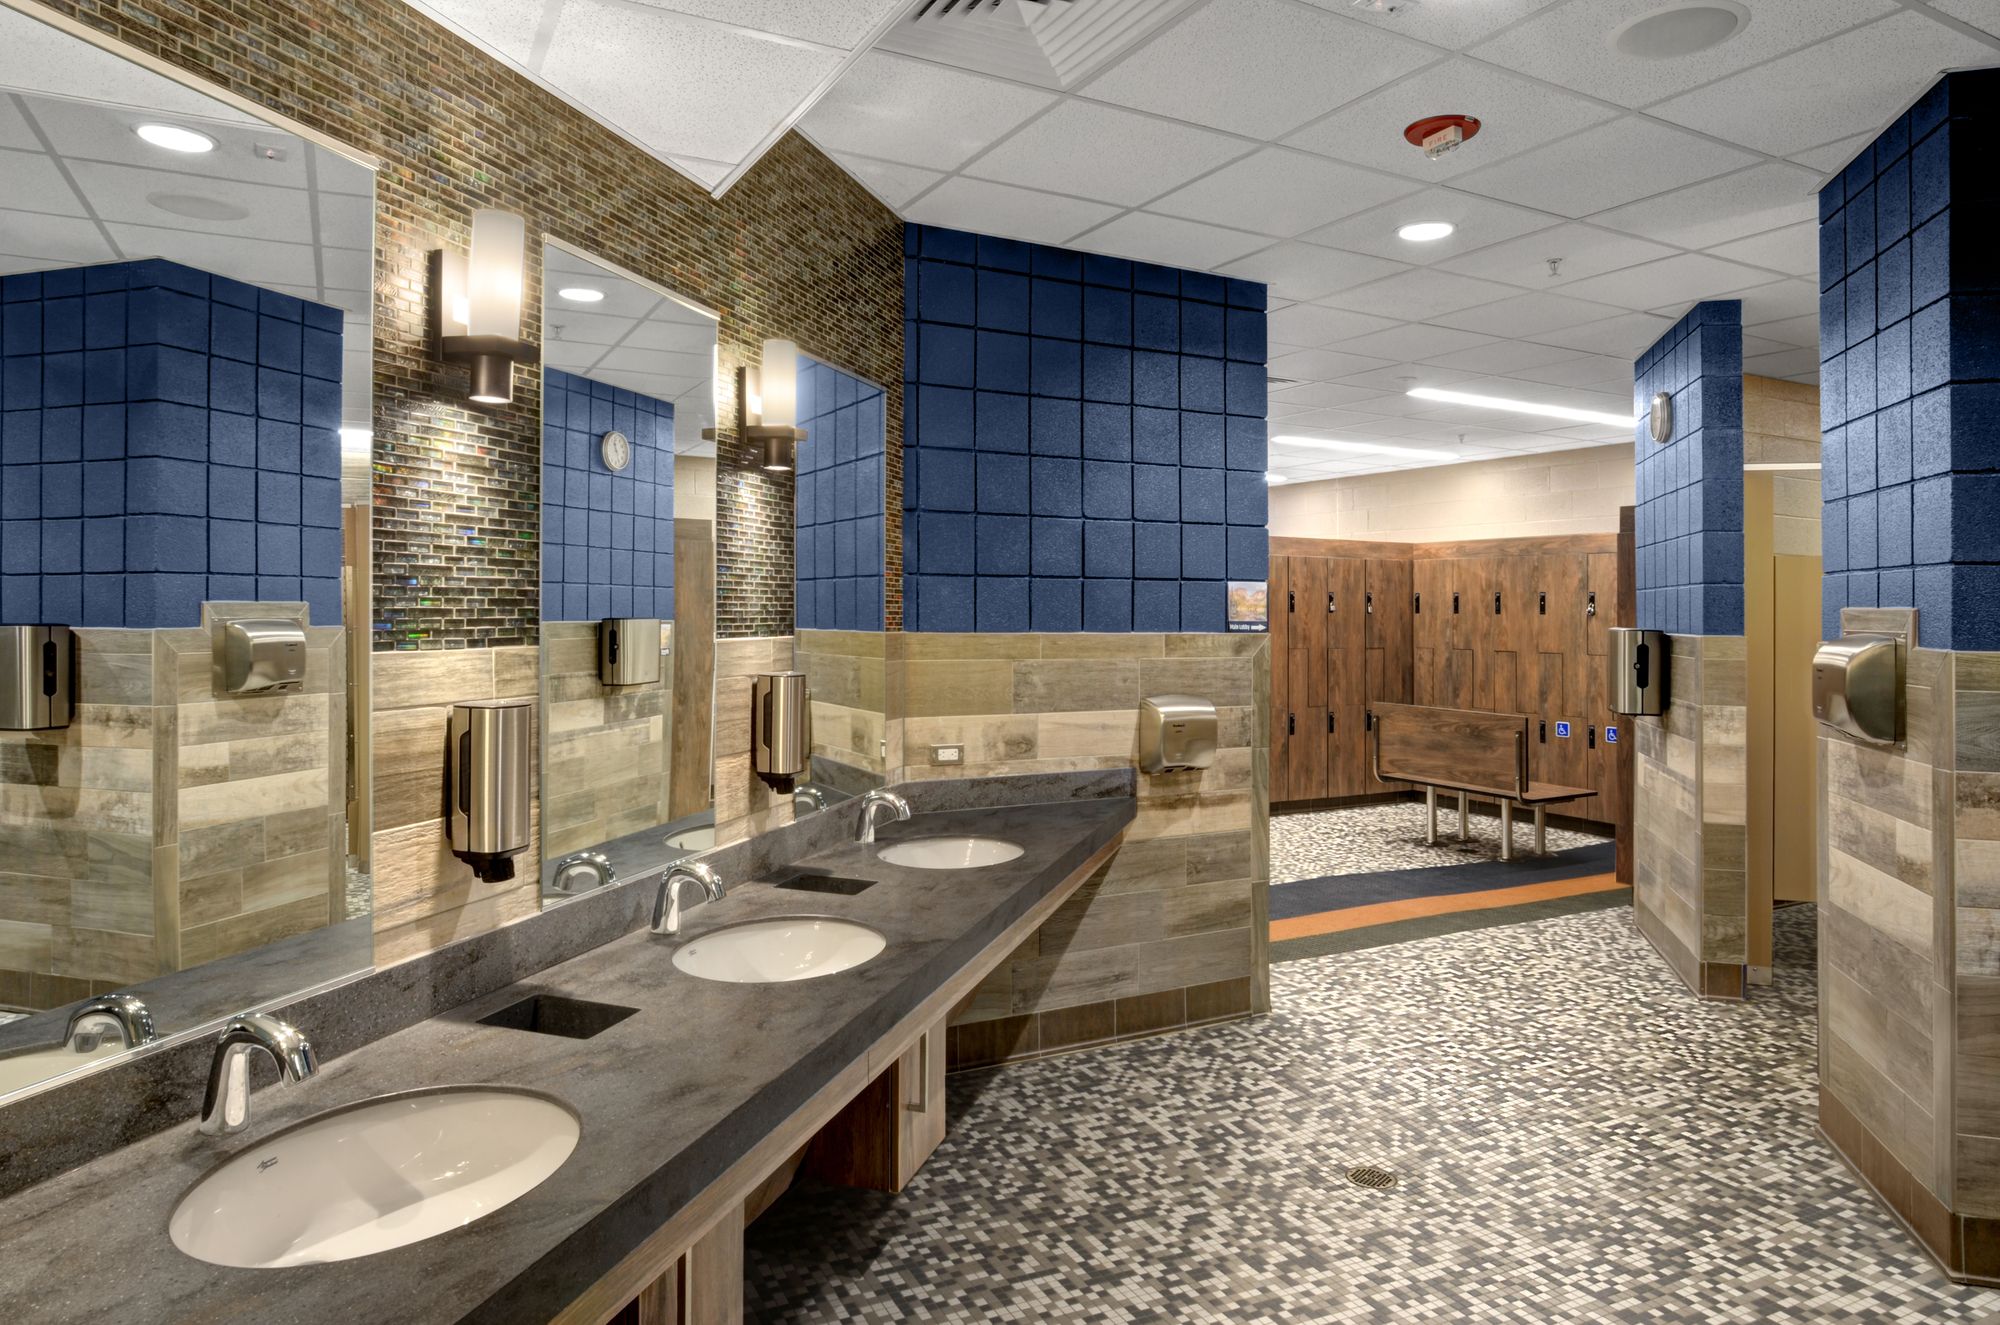 Upgraded illumination, patterned tile floor, wood tone tile wall, and wood locker all create a relaxing mountain environment at the Estes Valley Community Center in Estes Park, Colorado.